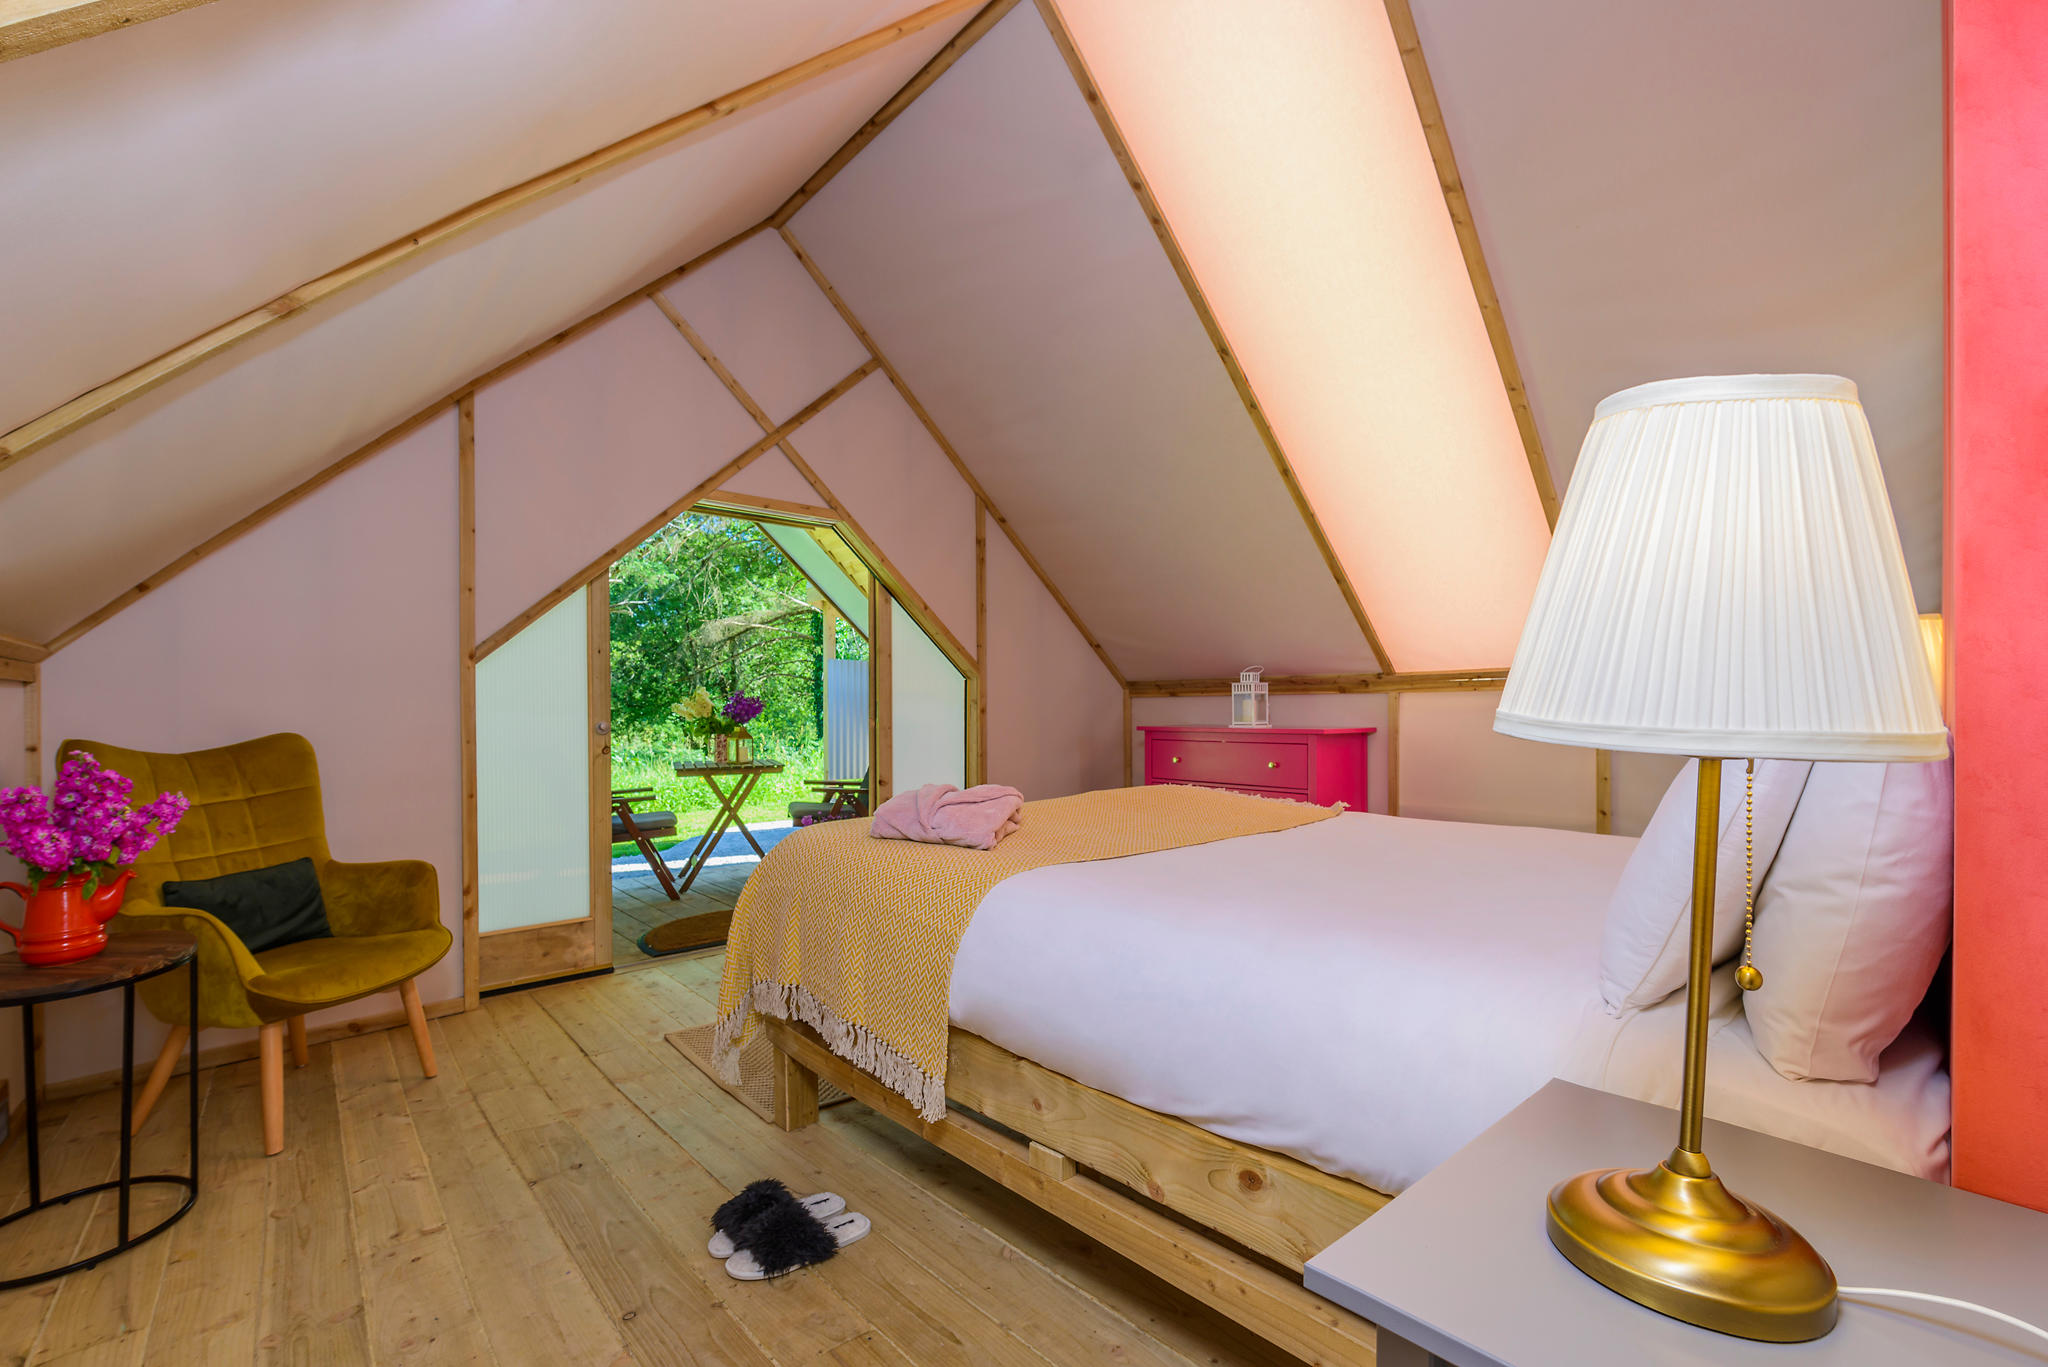 A Luxury Lodge Bedroom ready for guests arrival to Killarney Killarney Glamping At The Grove Kerry 087 975 0110